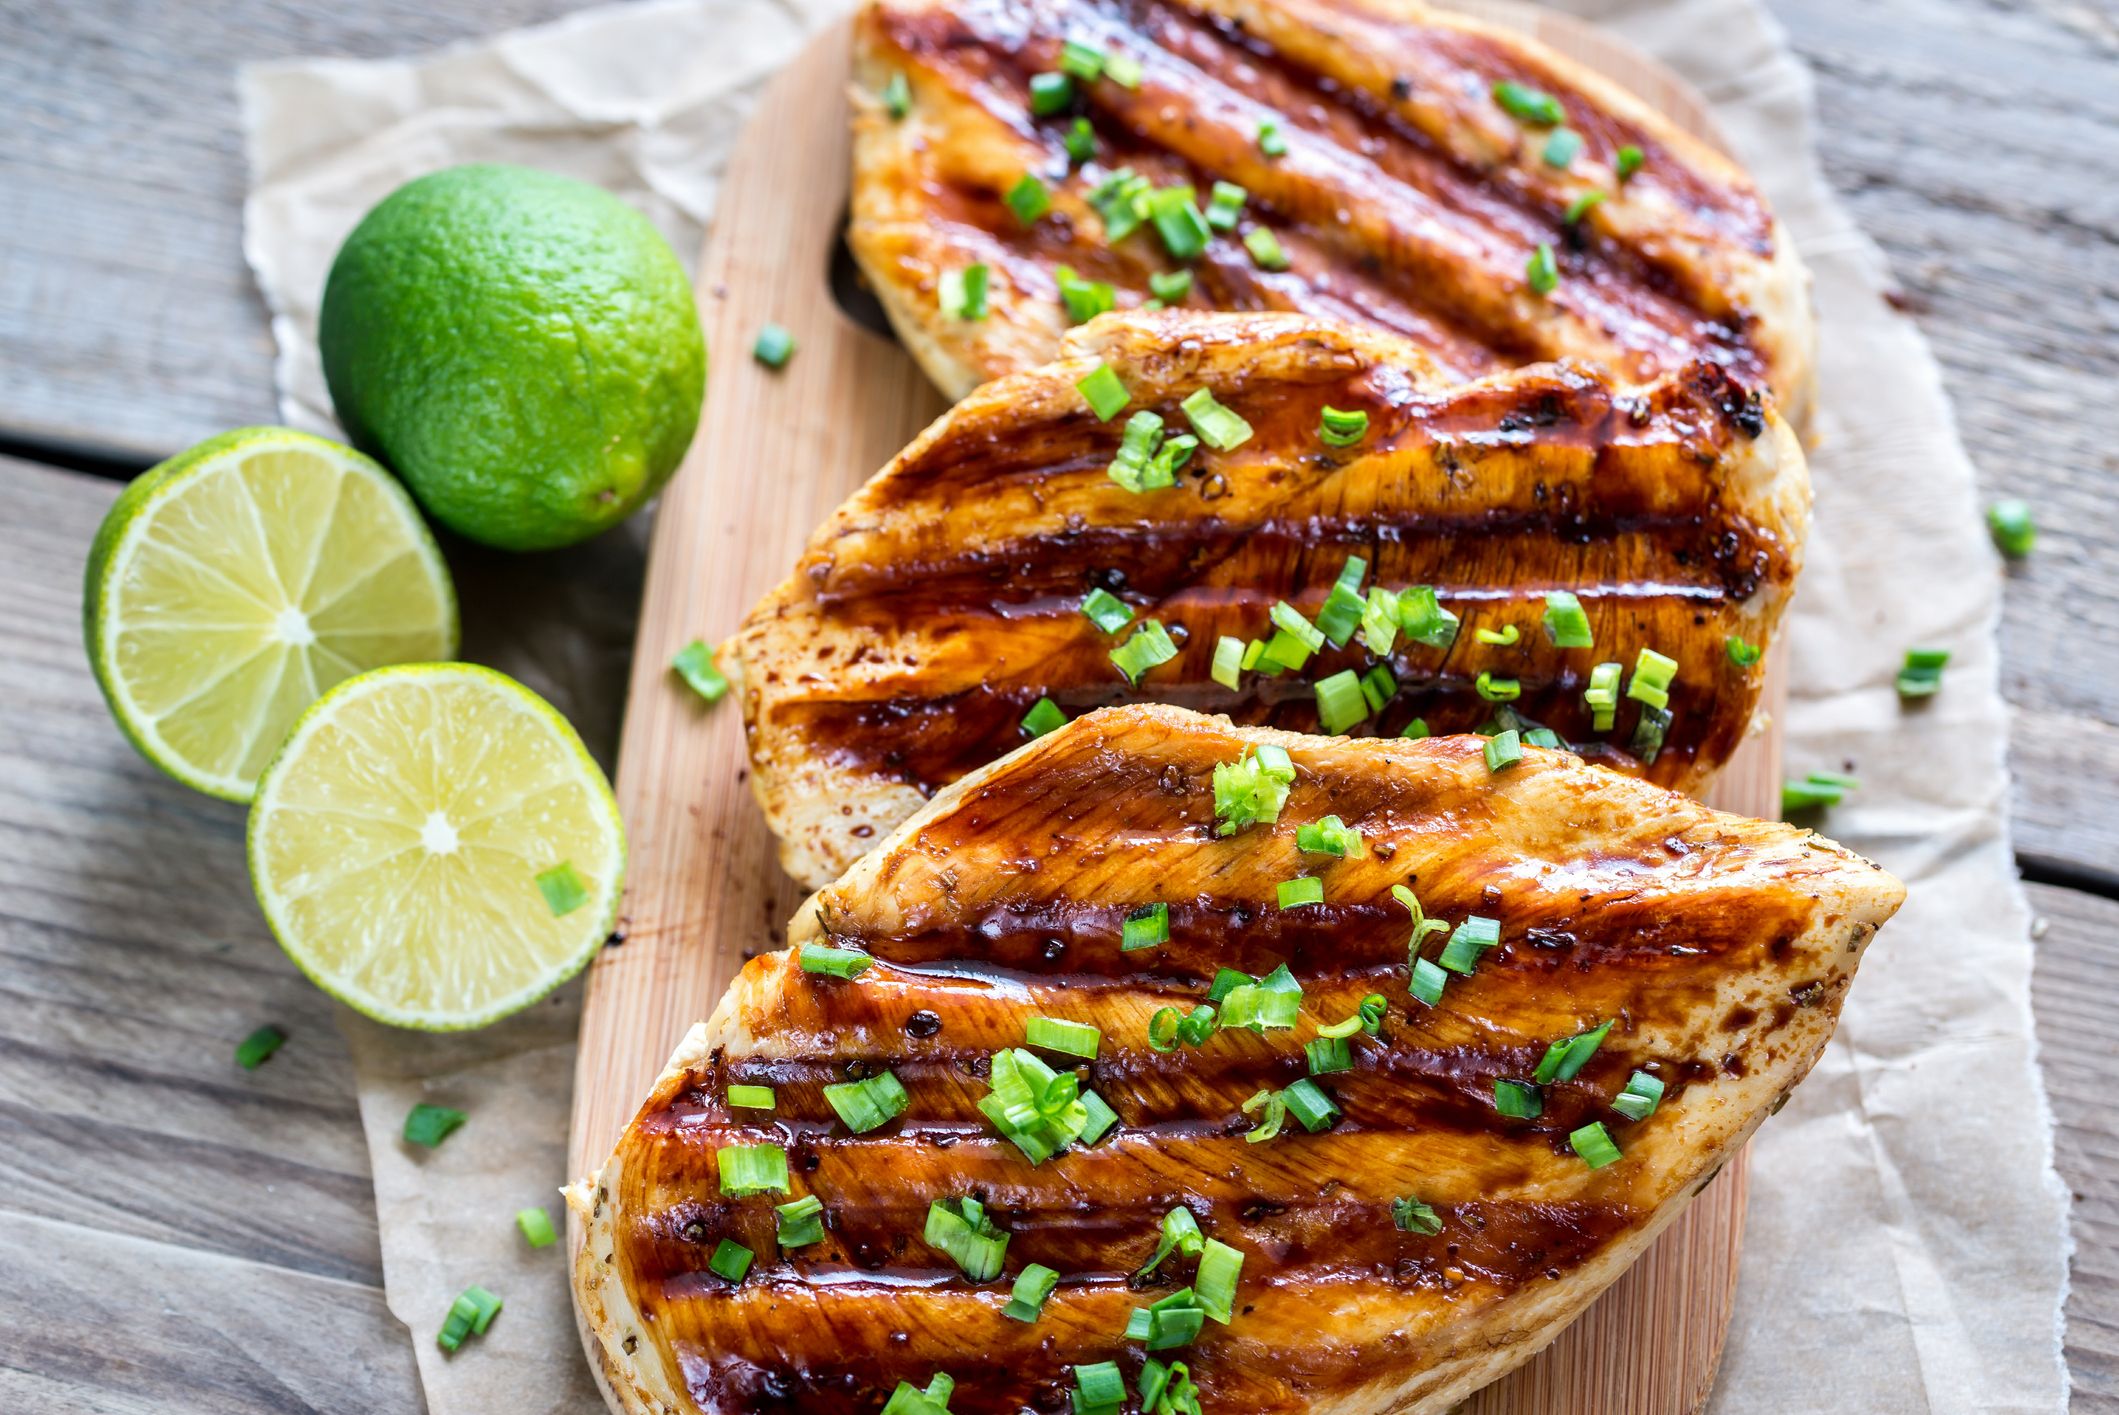 How Many Calories in Grilled Chicken Breast 